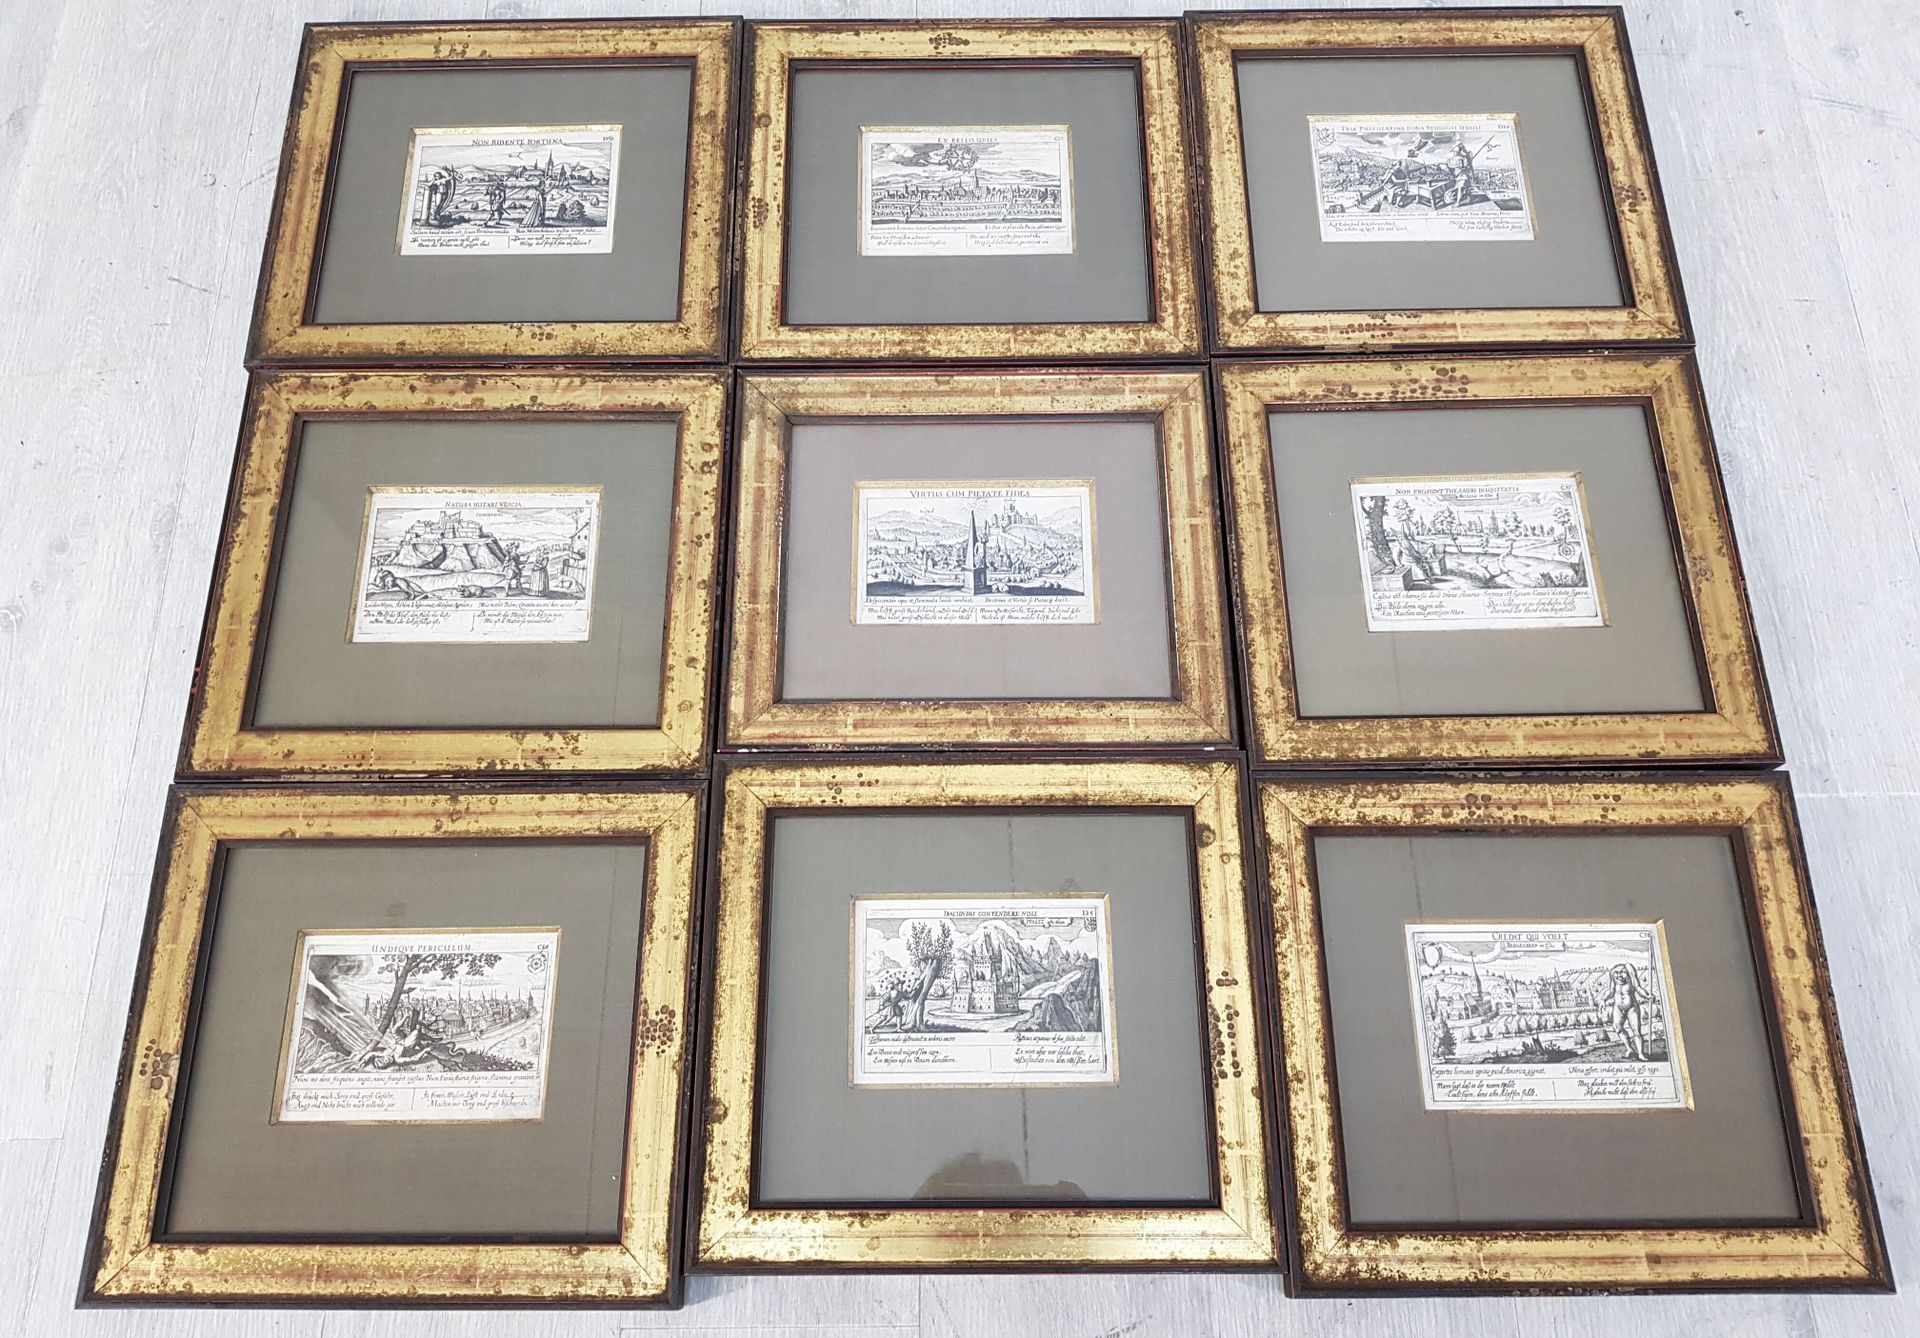 Null LOT of 9 engravings framed under glass of which views of cities. 

Average &hellip;